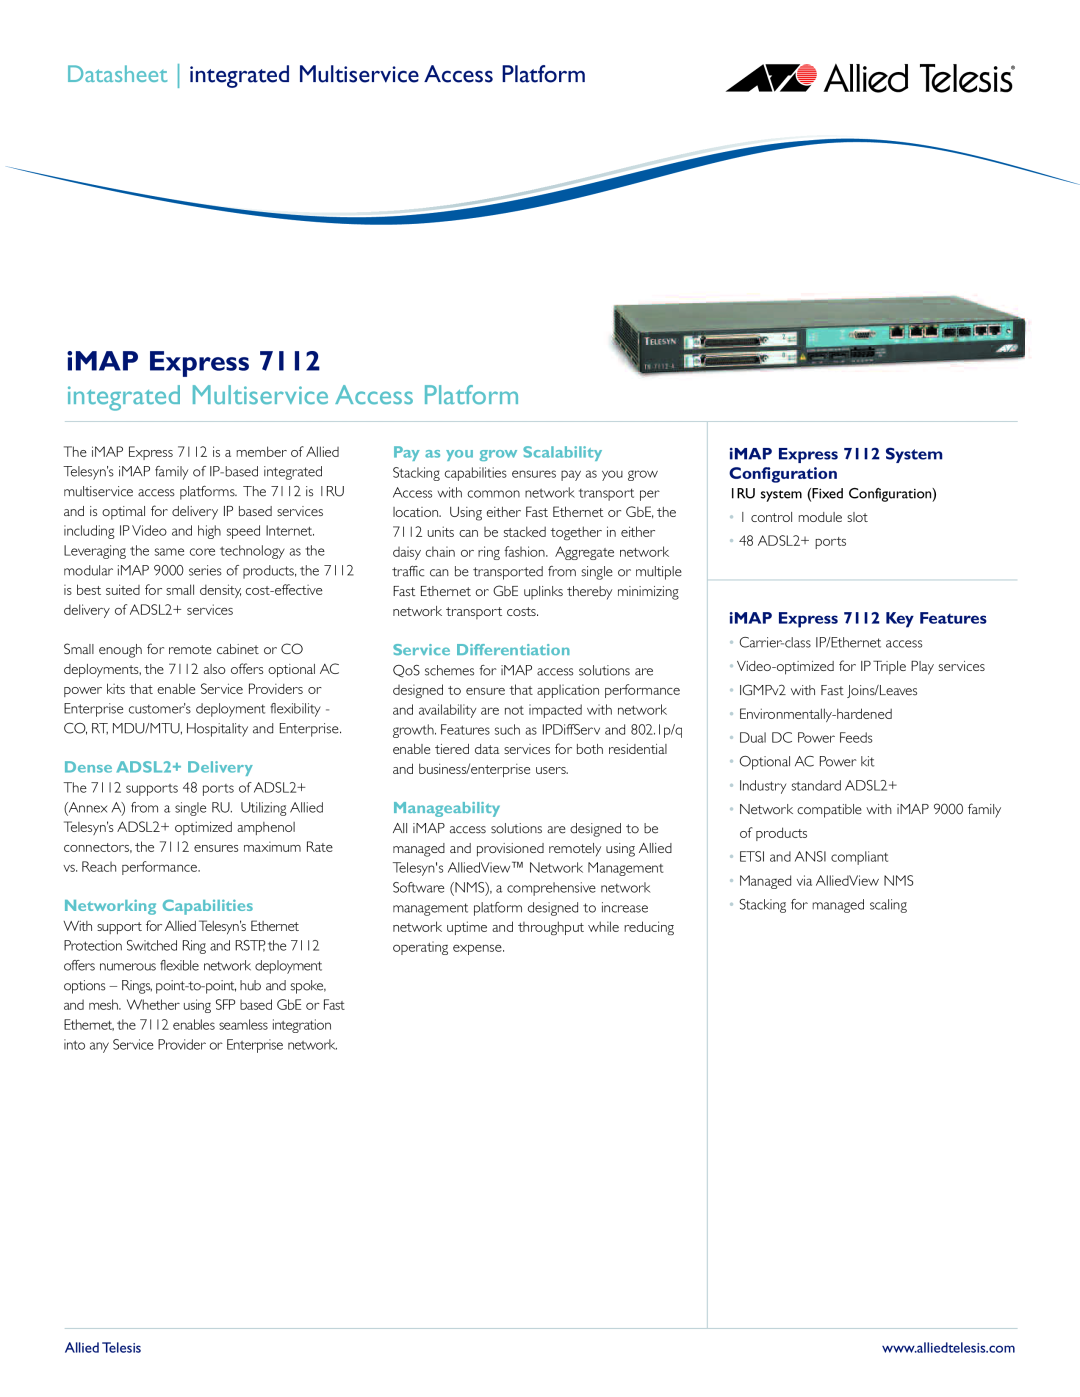 Allied Telesis manual integrated Multiservice Access Platform, iMAP Express 7112 System Configuration, Allied Telesis 